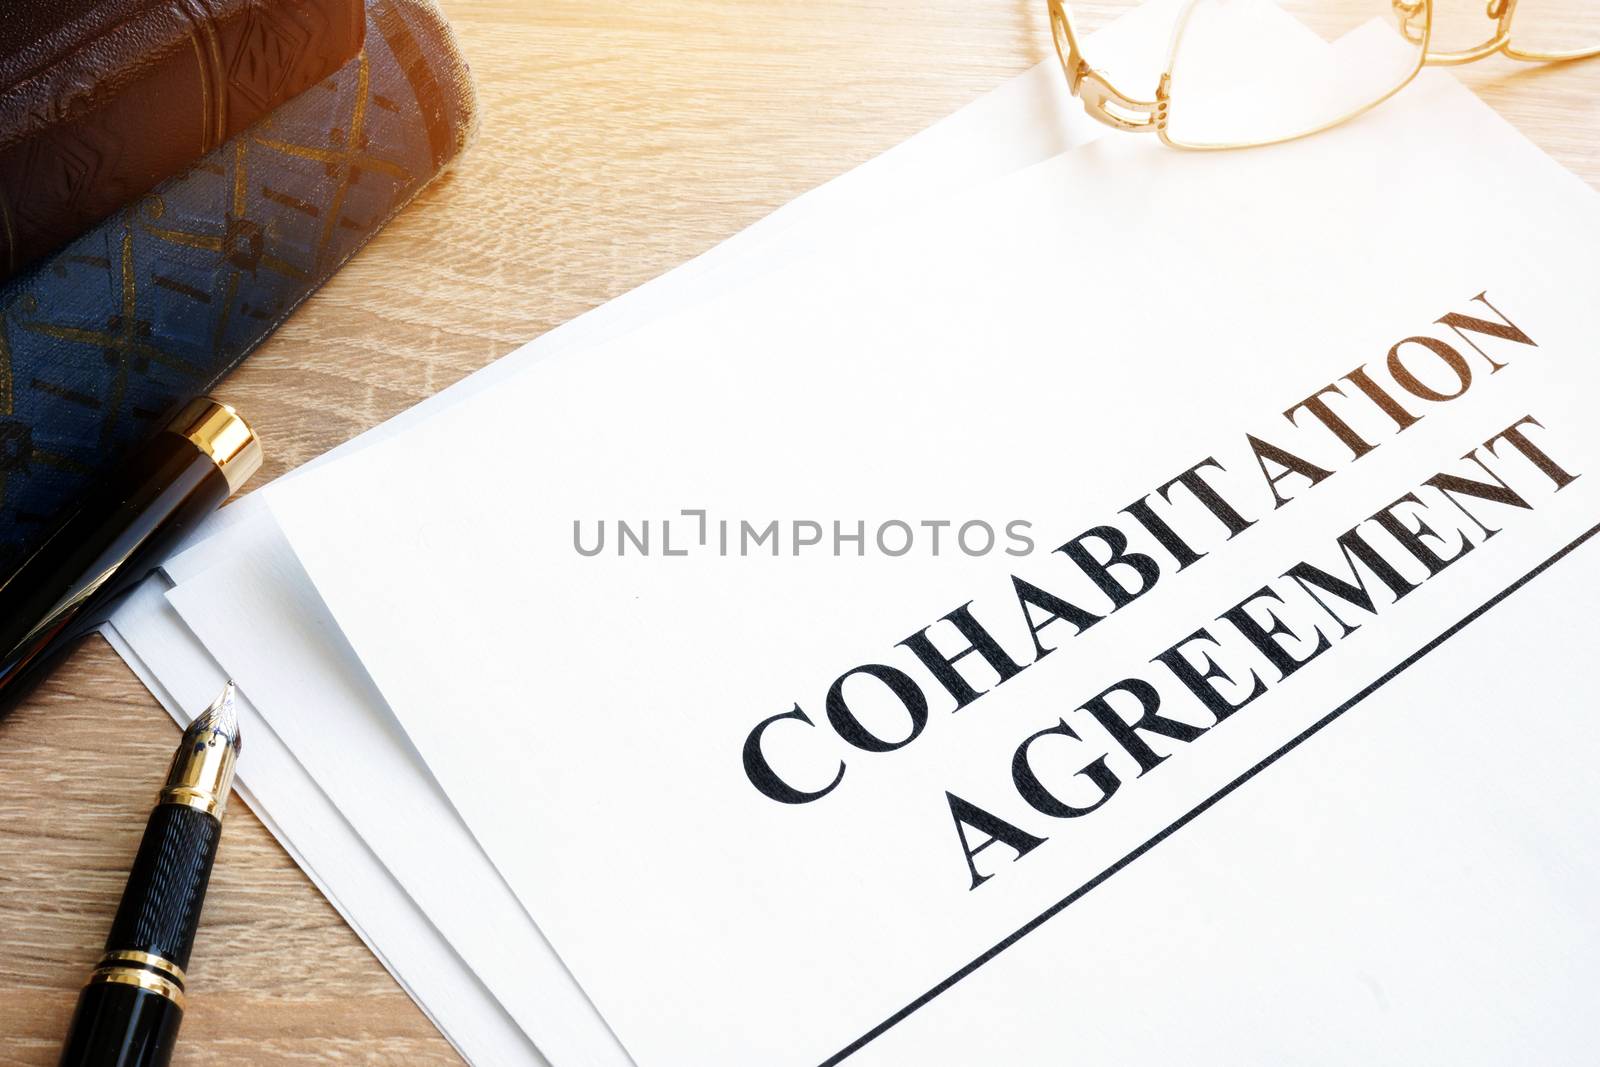 Cohabitation Agreement and books on a table.